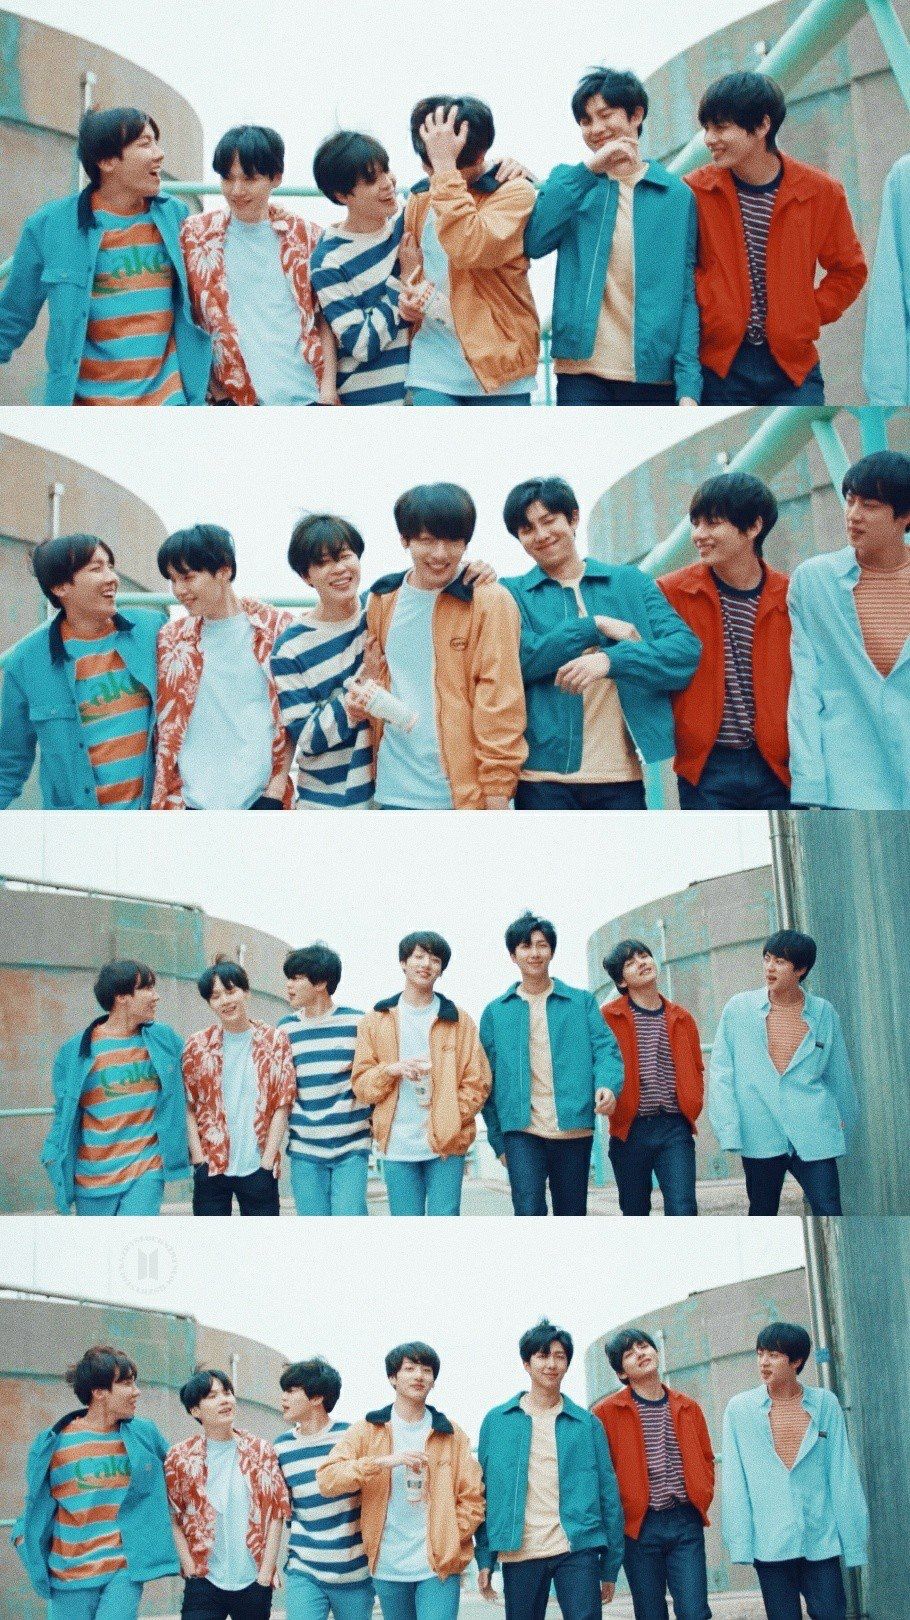 Aaa Euphoria Is Sso Good, N The Video Is So Well Made - Bts Euphoria , HD Wallpaper & Backgrounds